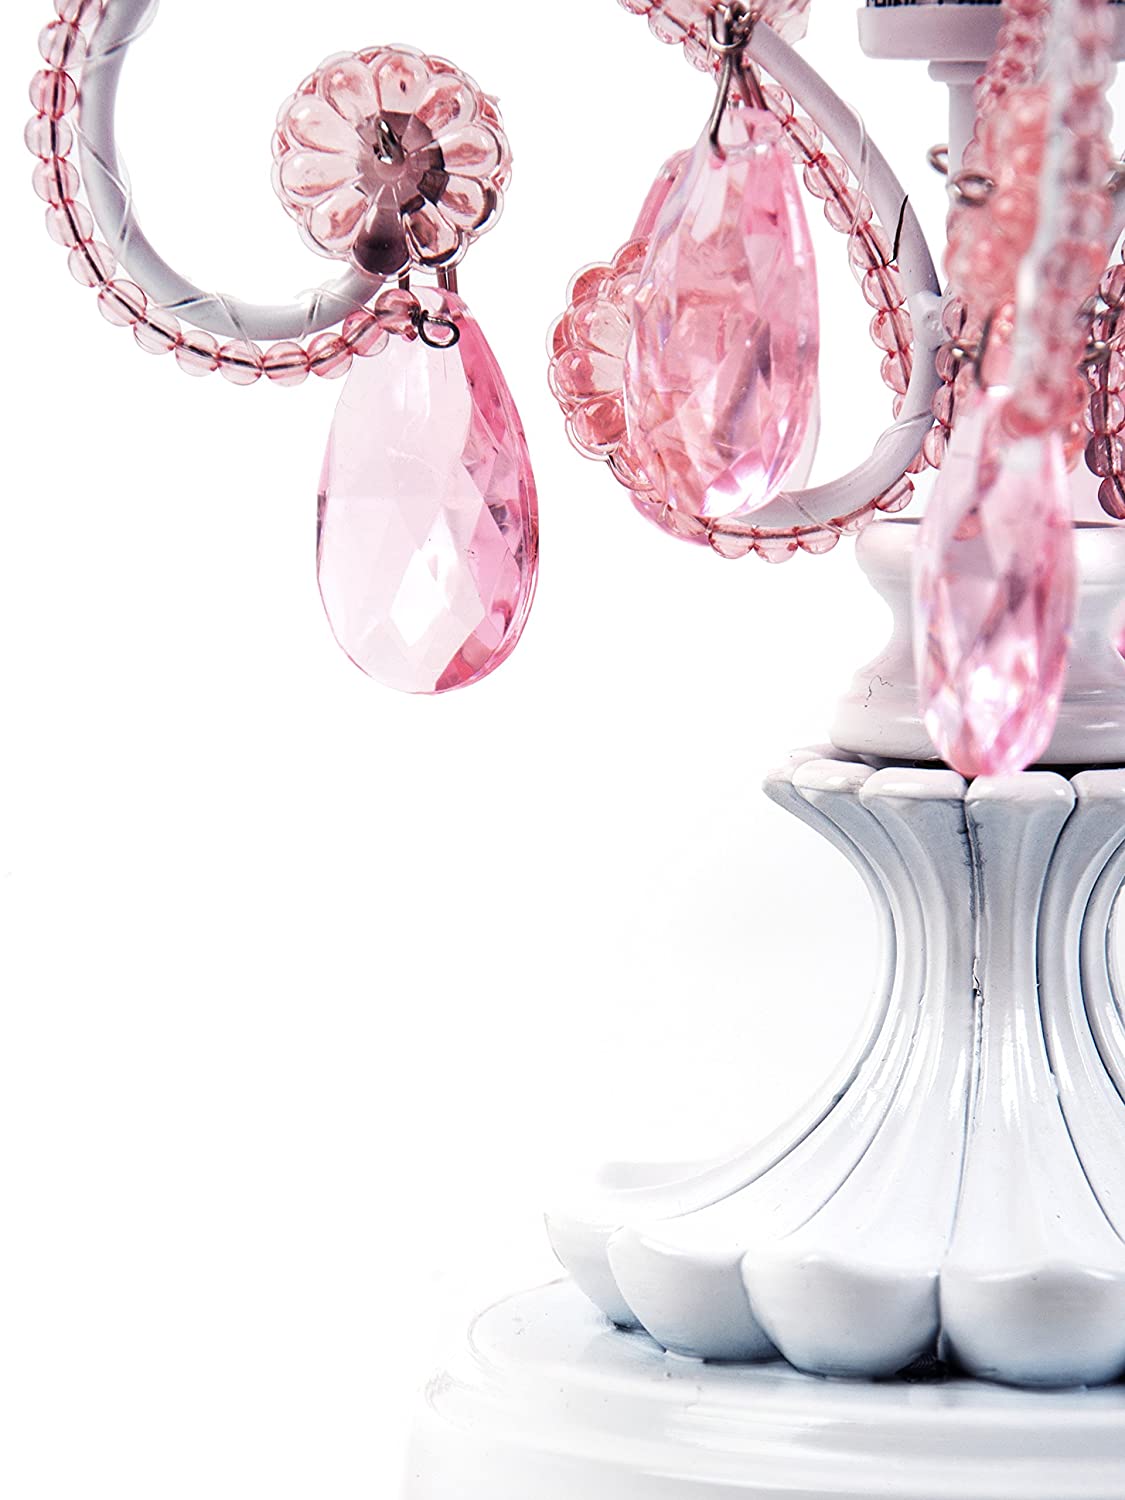 Tadpoles Chandelier Mini Table Lamp, Pink - image 3 of 5